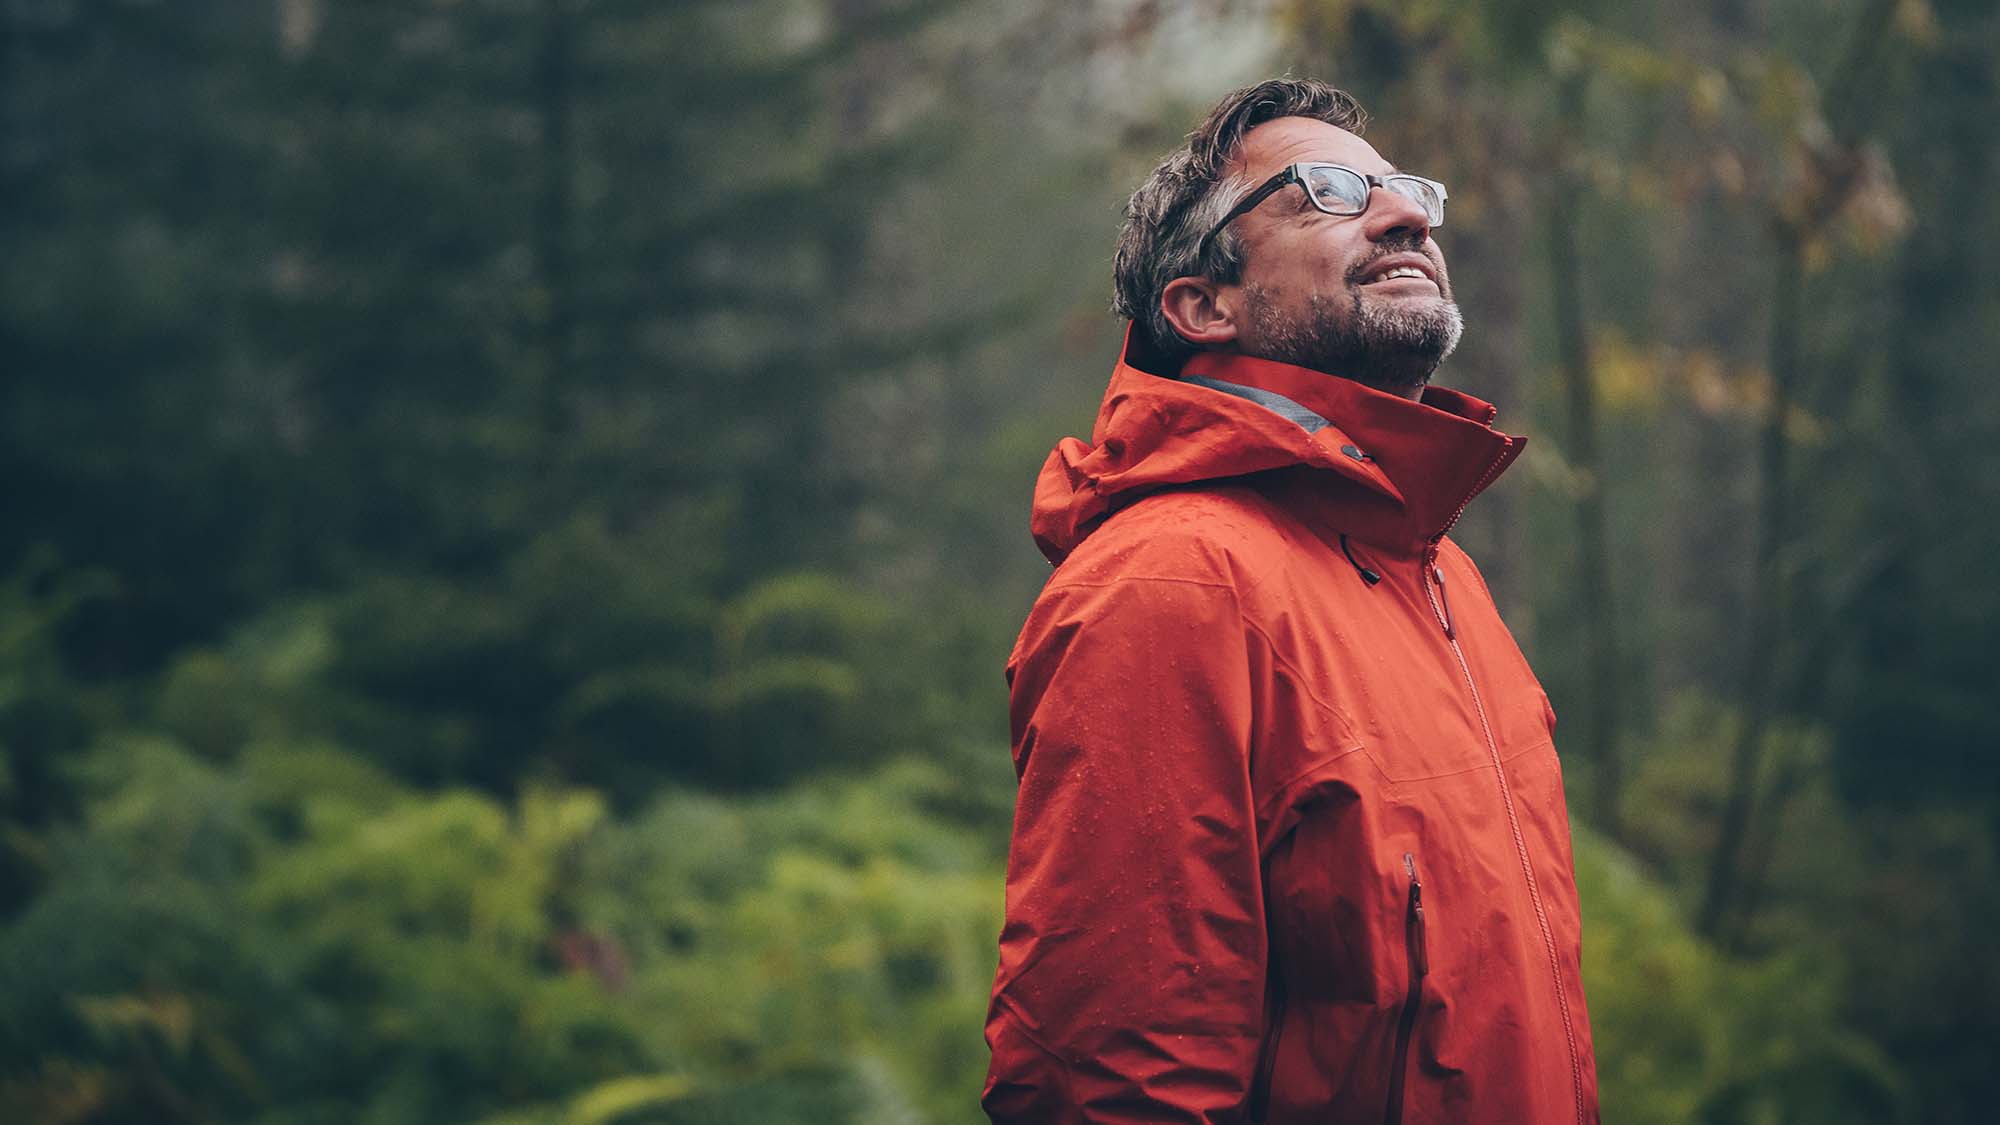 A mean wearing a red all-weather coat looks upward at a forest canopy.